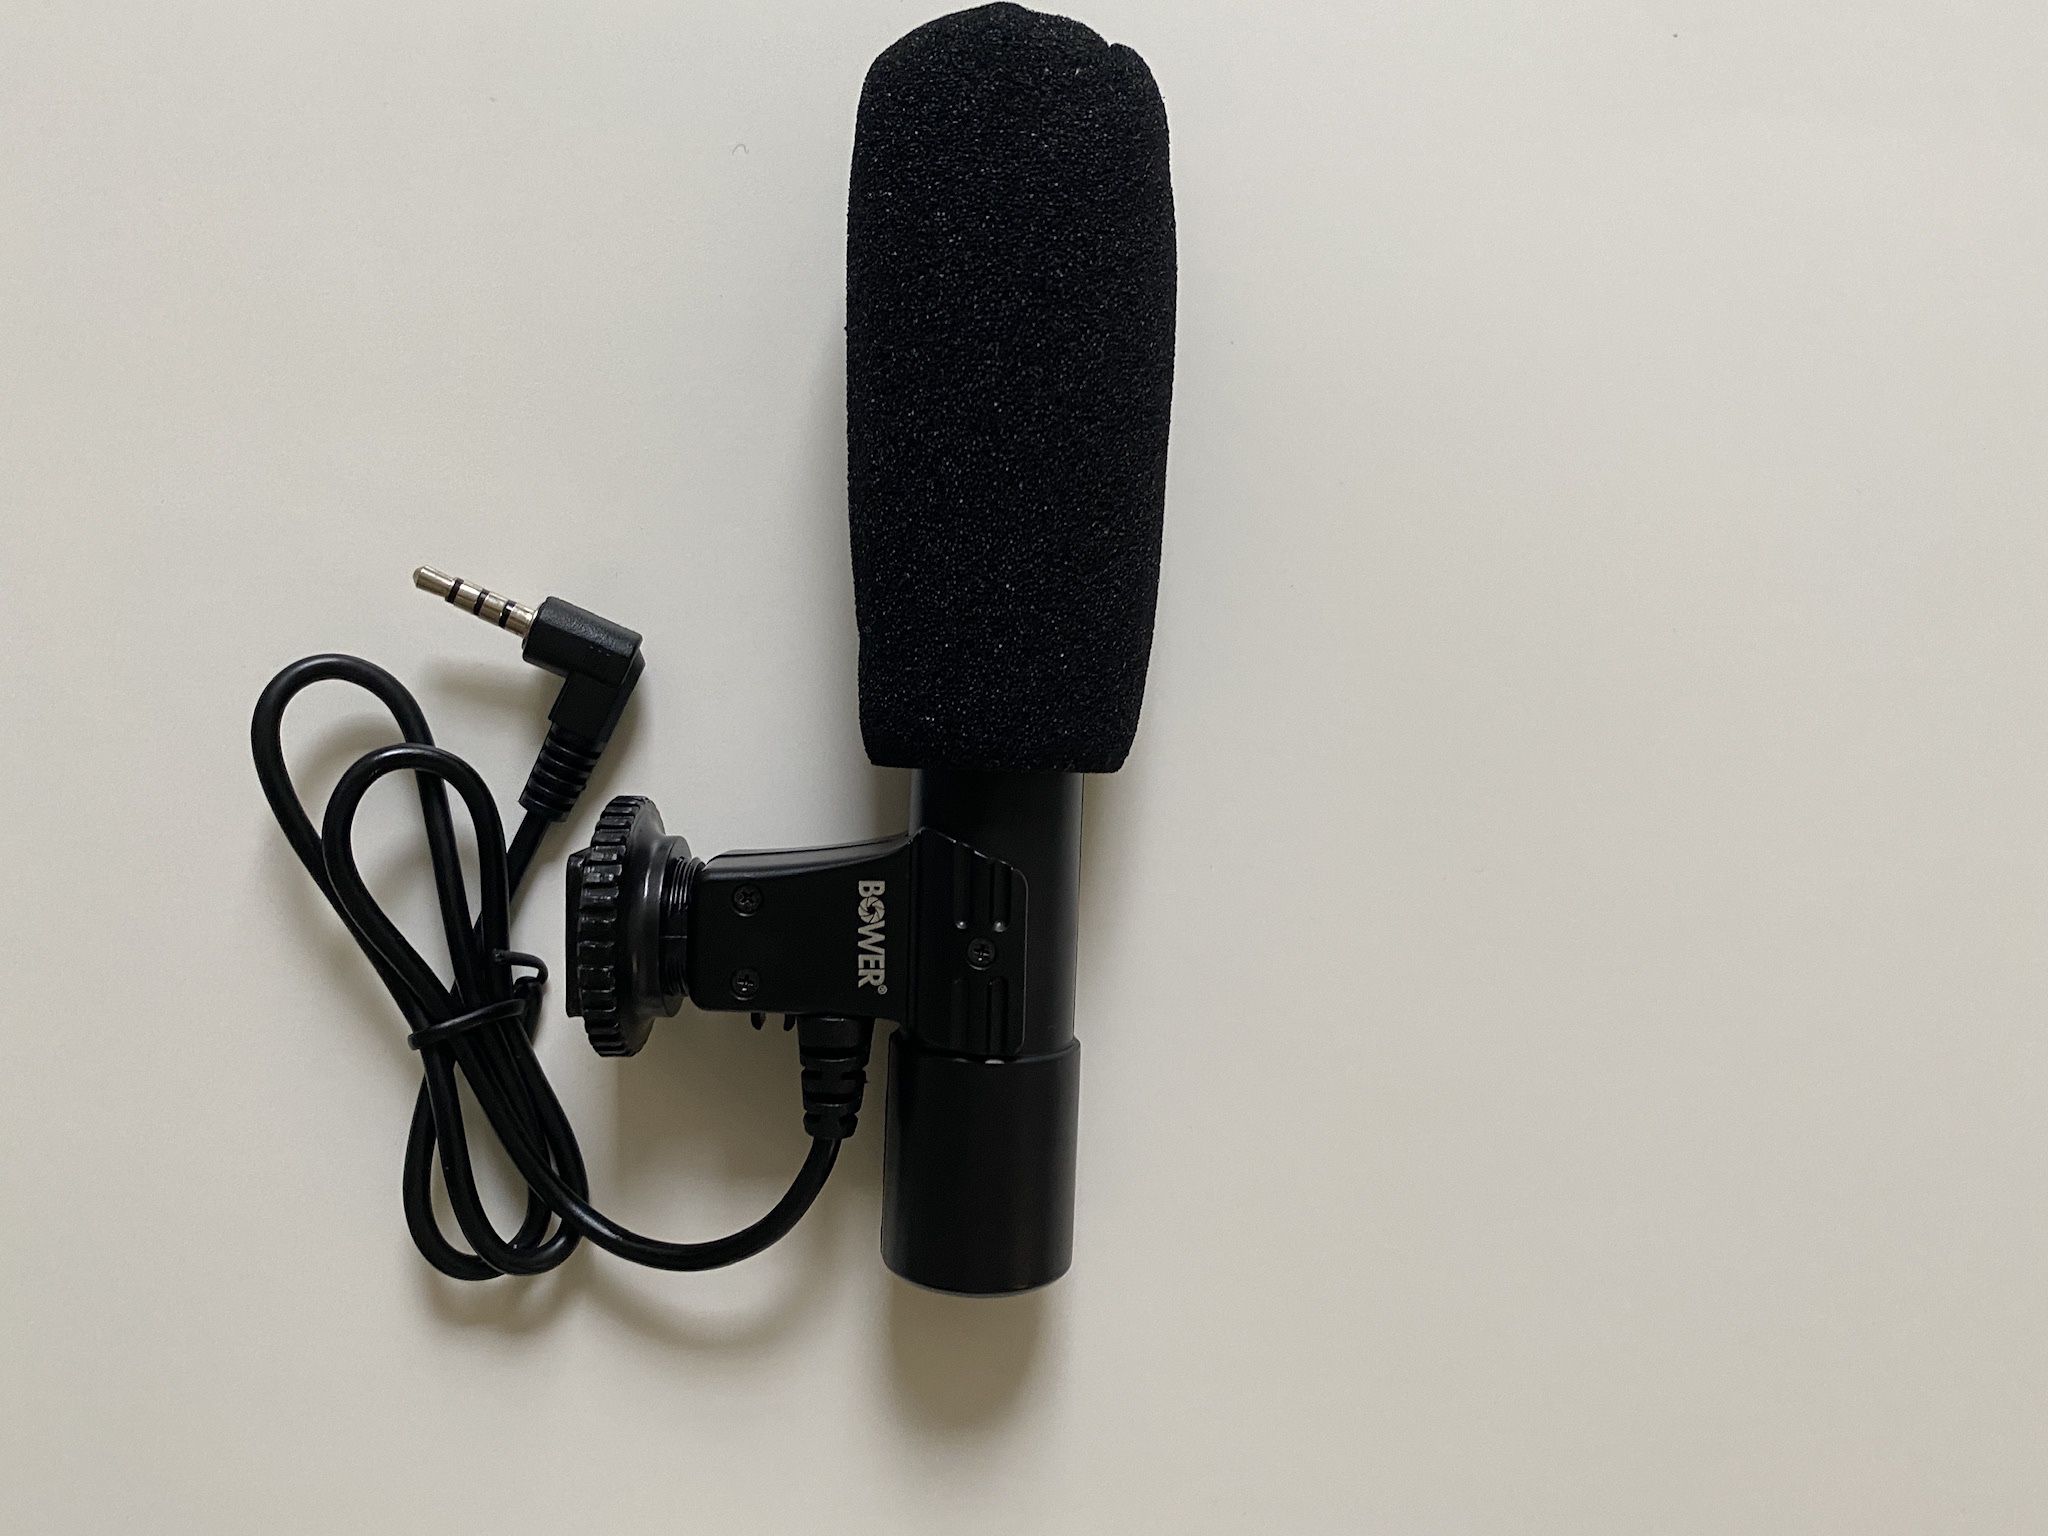 Video Microphone Mic for Camera Canon, Nikon, Sony A7III A6500 A6400 A6300, Panasonic GH5 GH4, GoPro Mic Adapter, iPhone Vlog Vlogger 